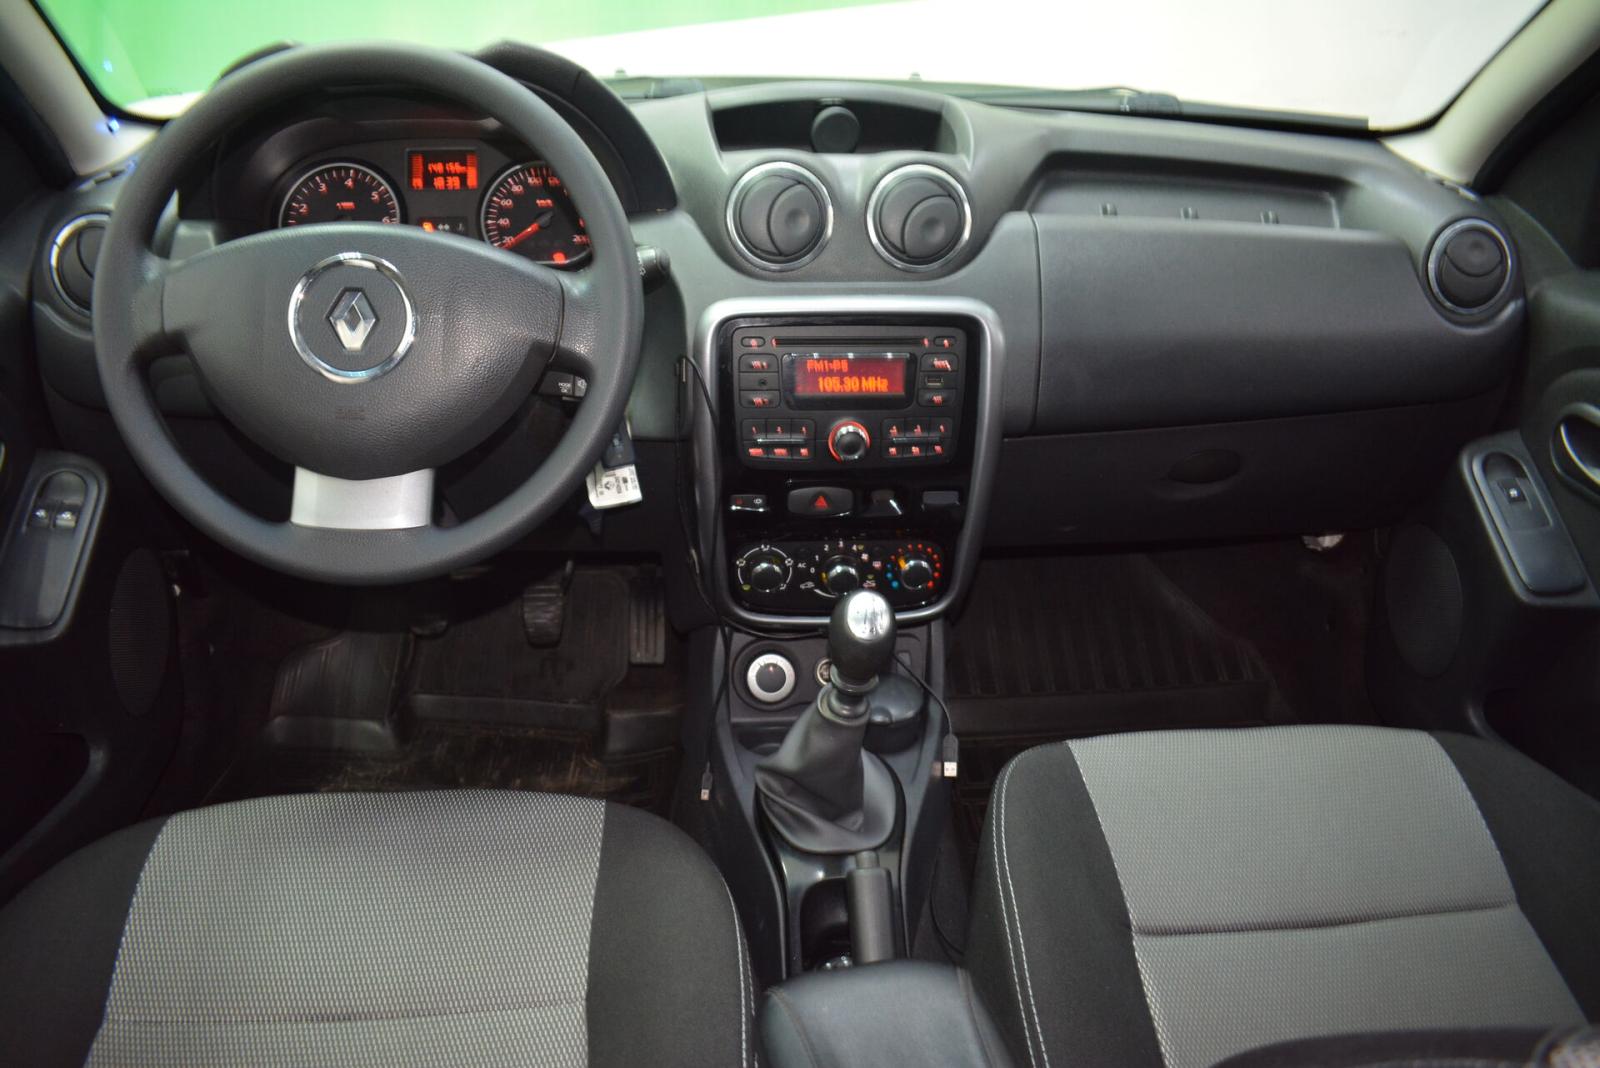 Renault Duster, I 2013г.